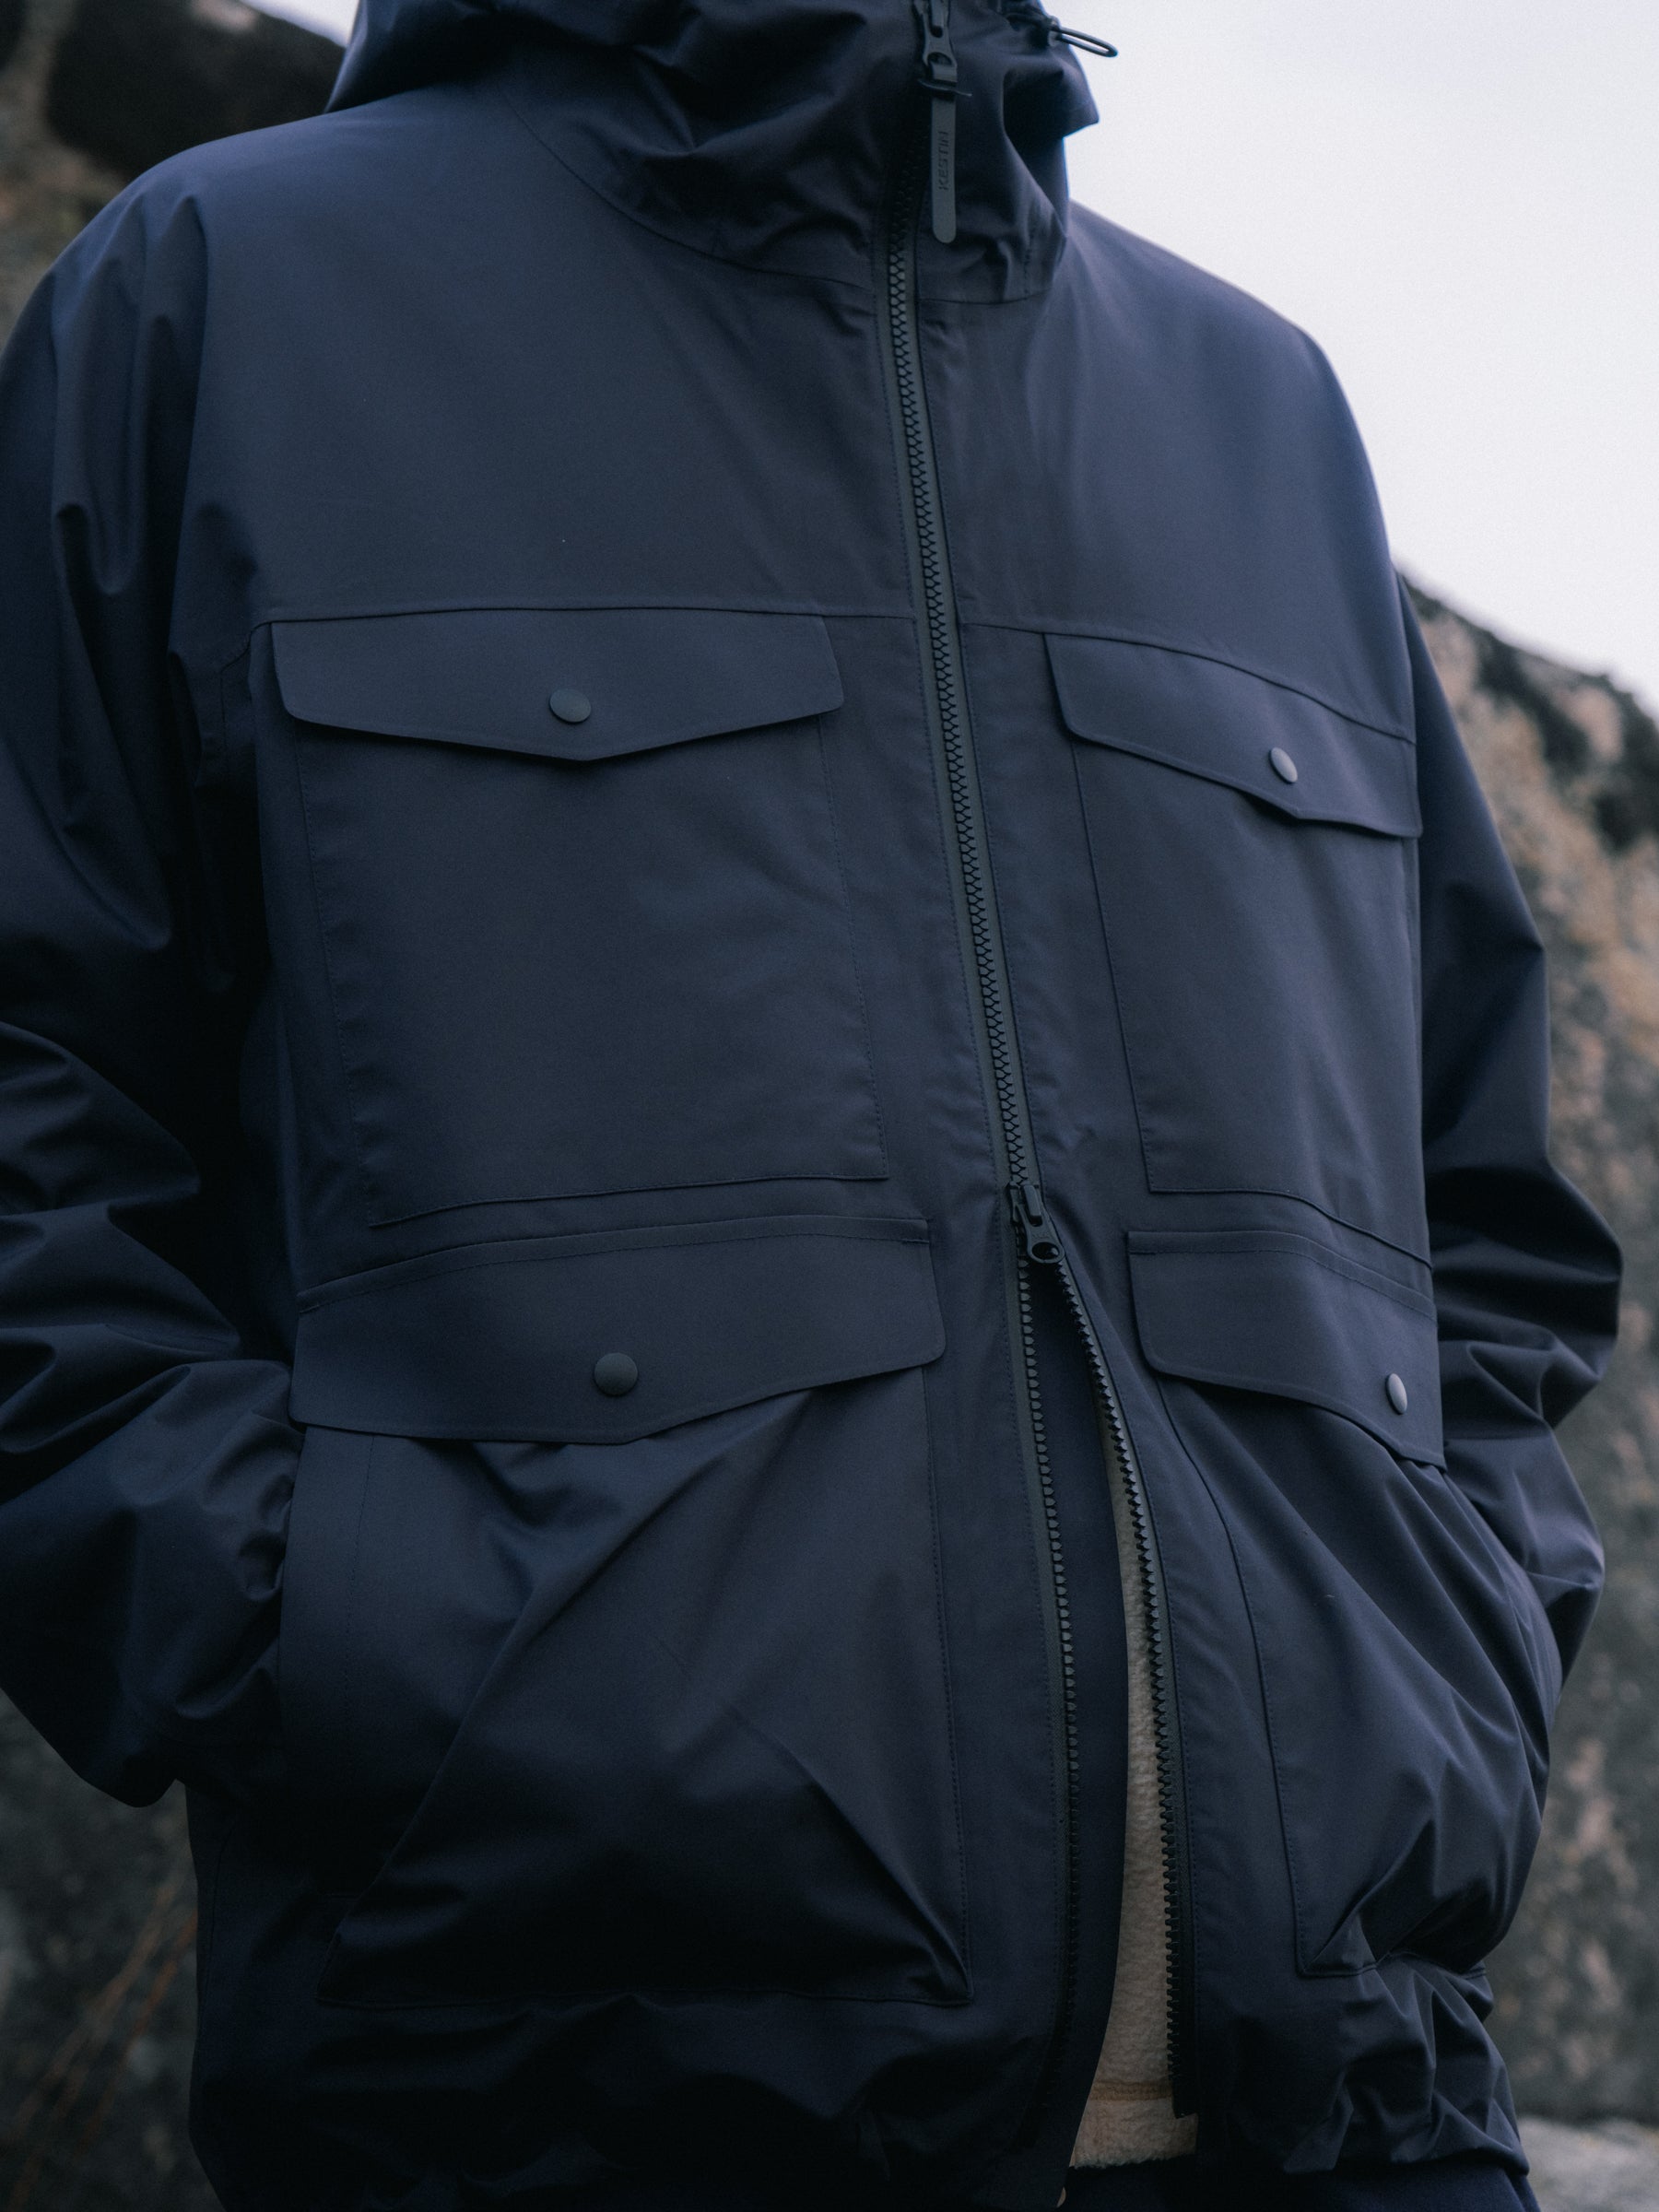 A man wearing a navy blue waterproof jacket with his hands in his pockets.